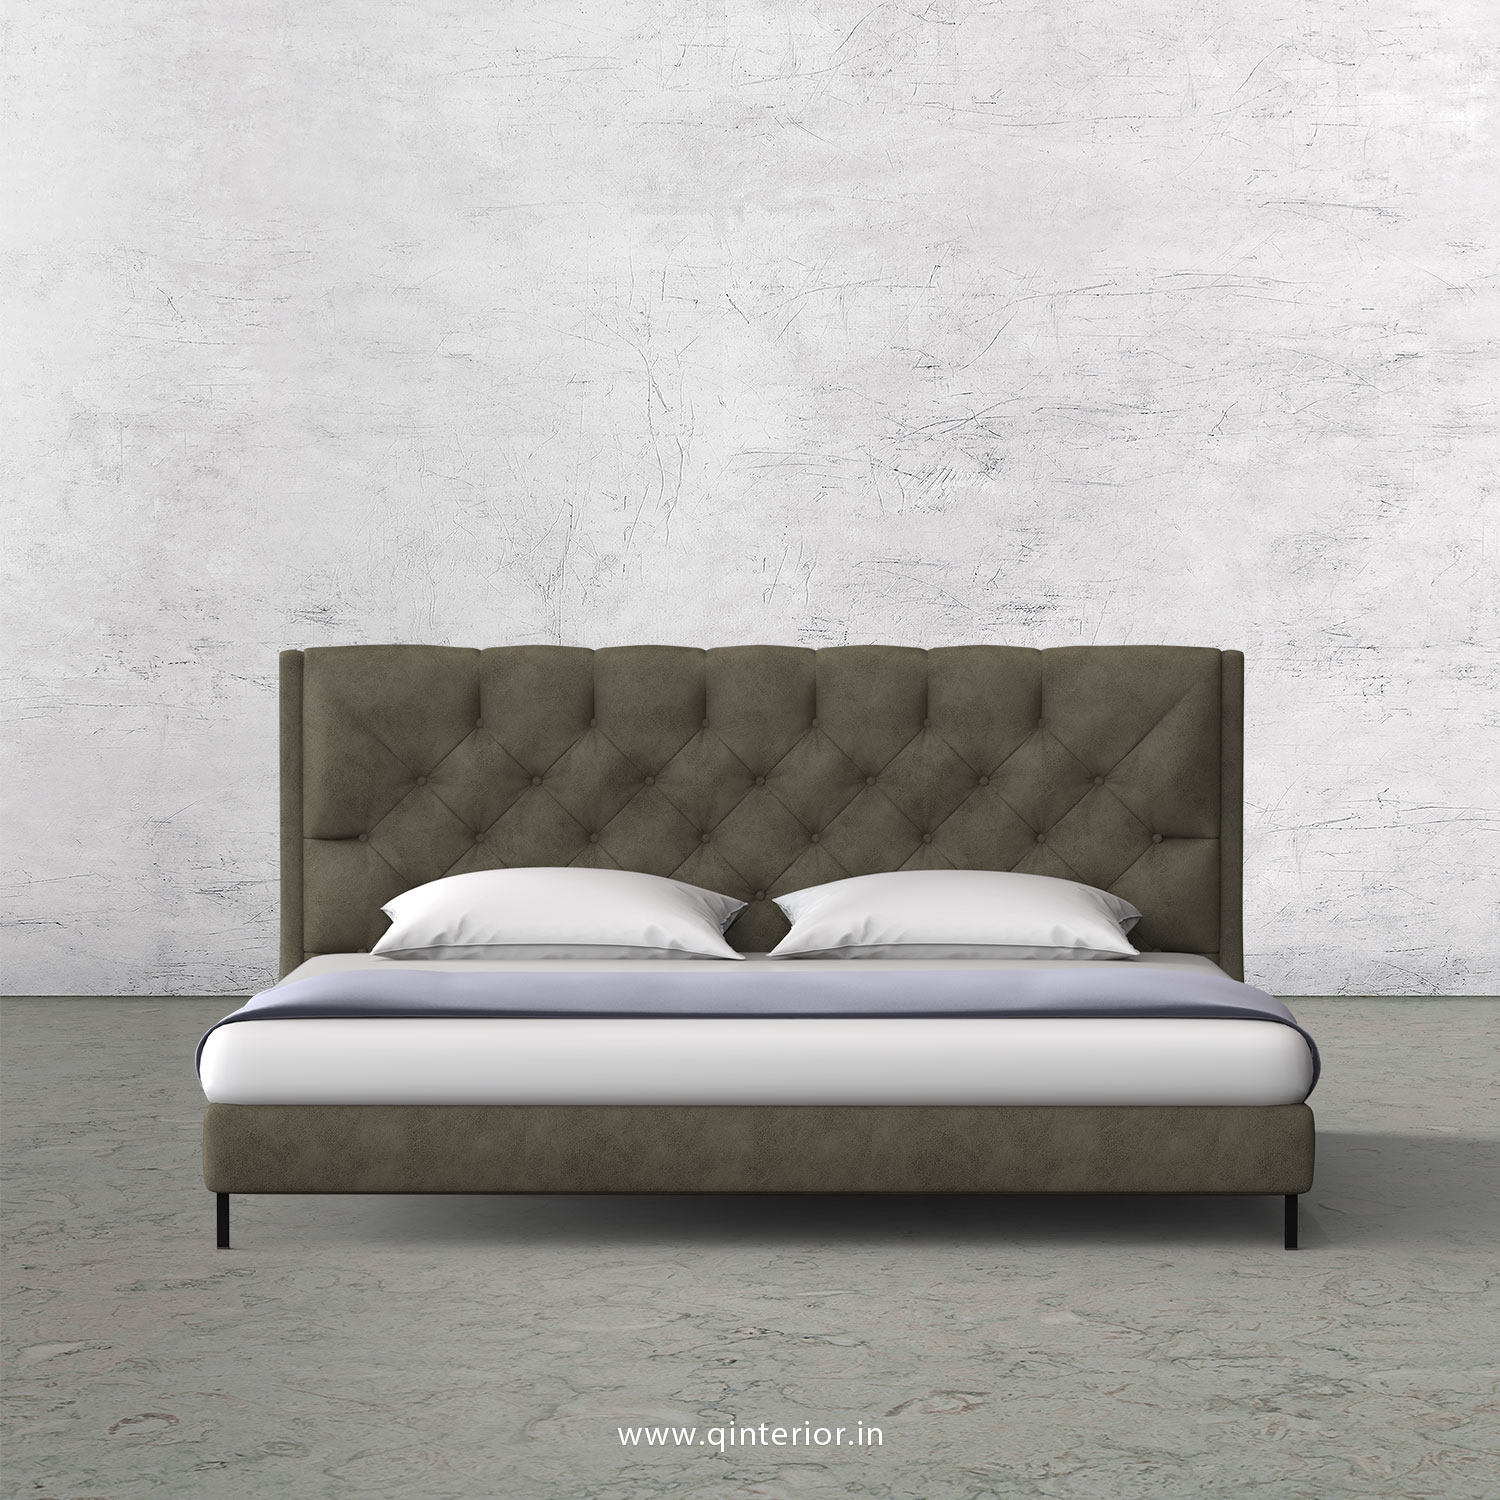 Scorpius King Size Bed in Fab Leather Fabric - KBD003 FL03